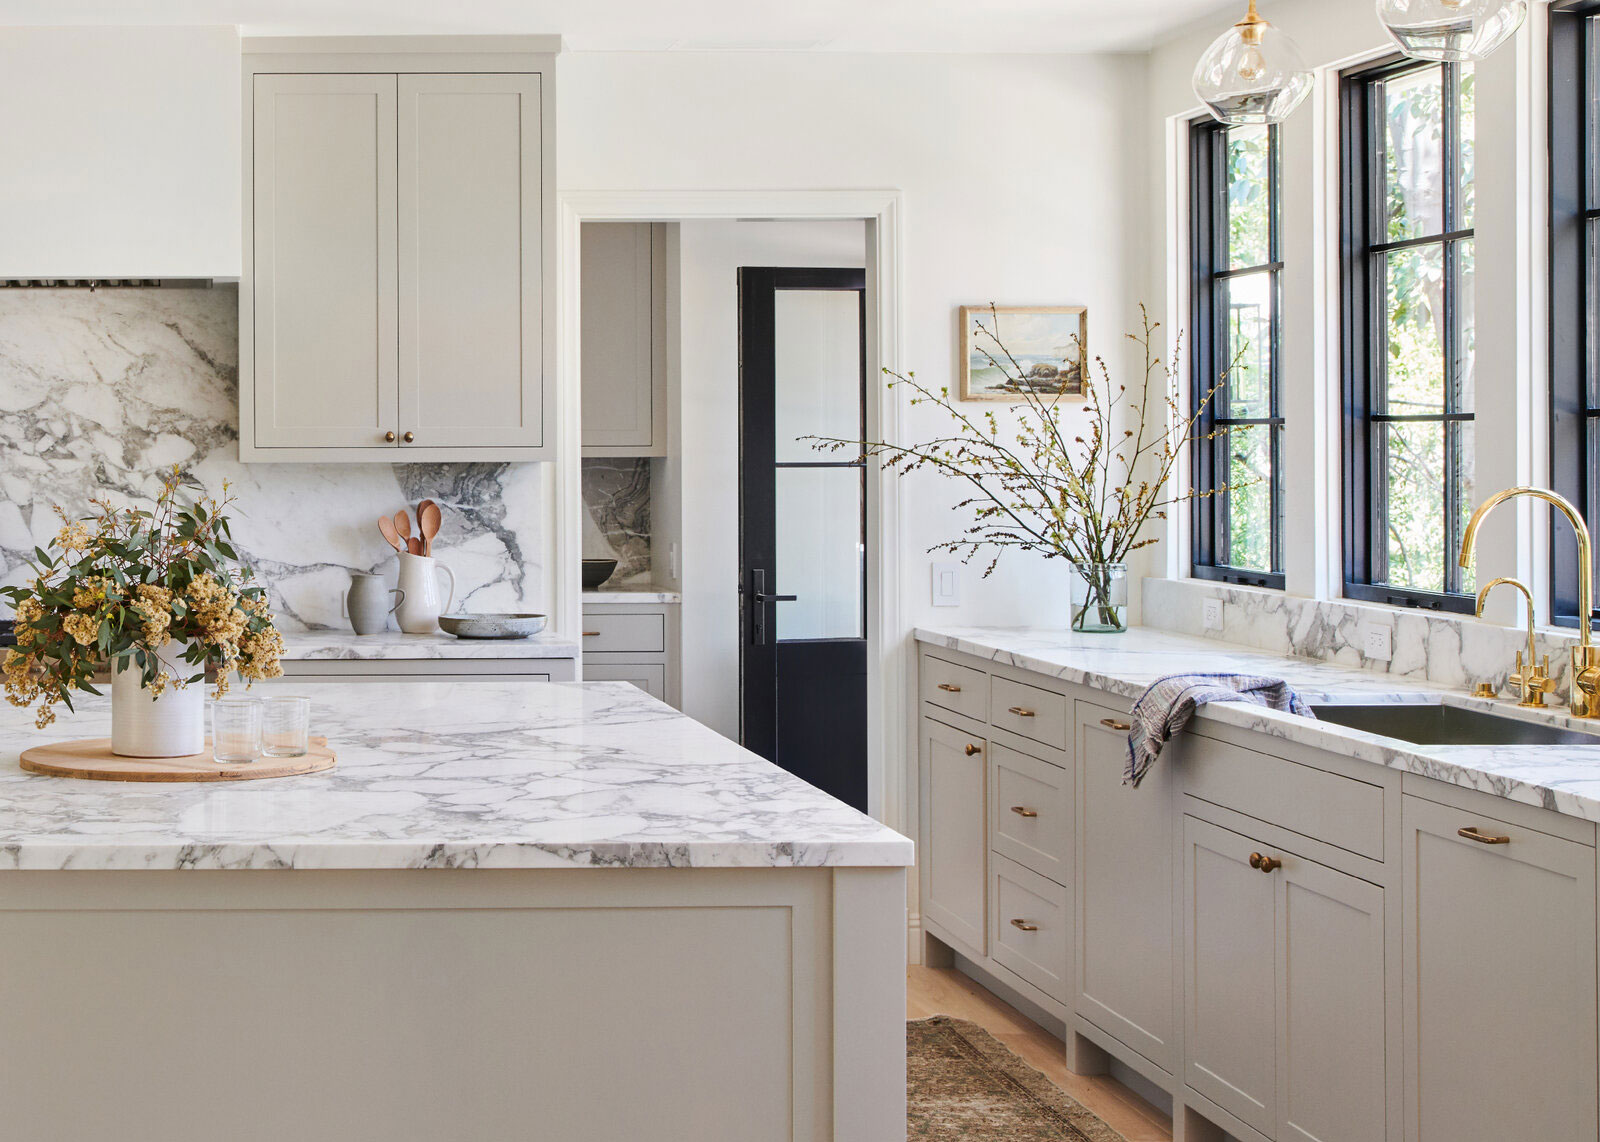 Kitchen styles: The ultimate guide, from Shaker to slab